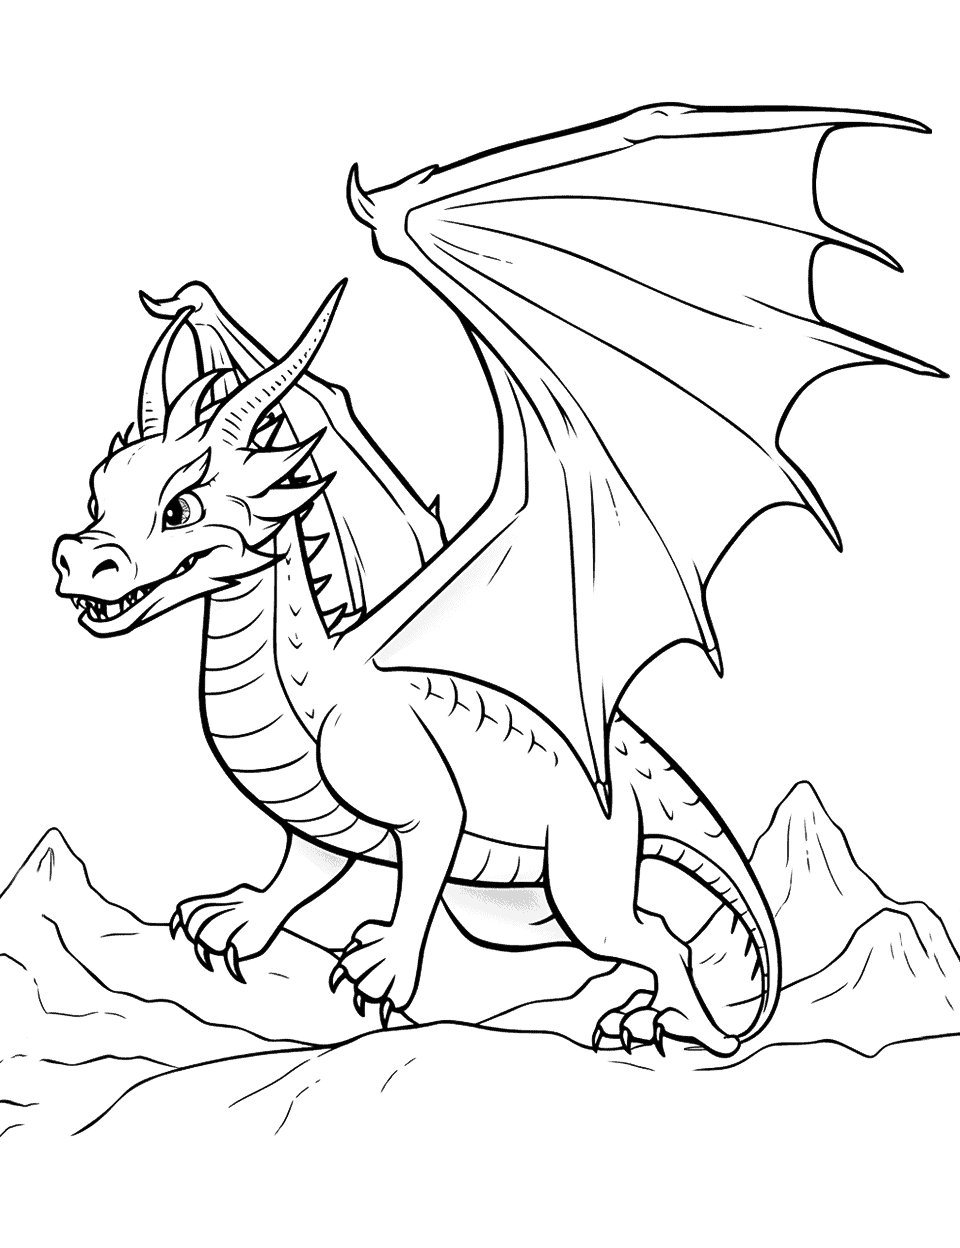 Realistic Dragon Coloring Page - A detailed and realistic dragon soaring in the sky above a mountain range.